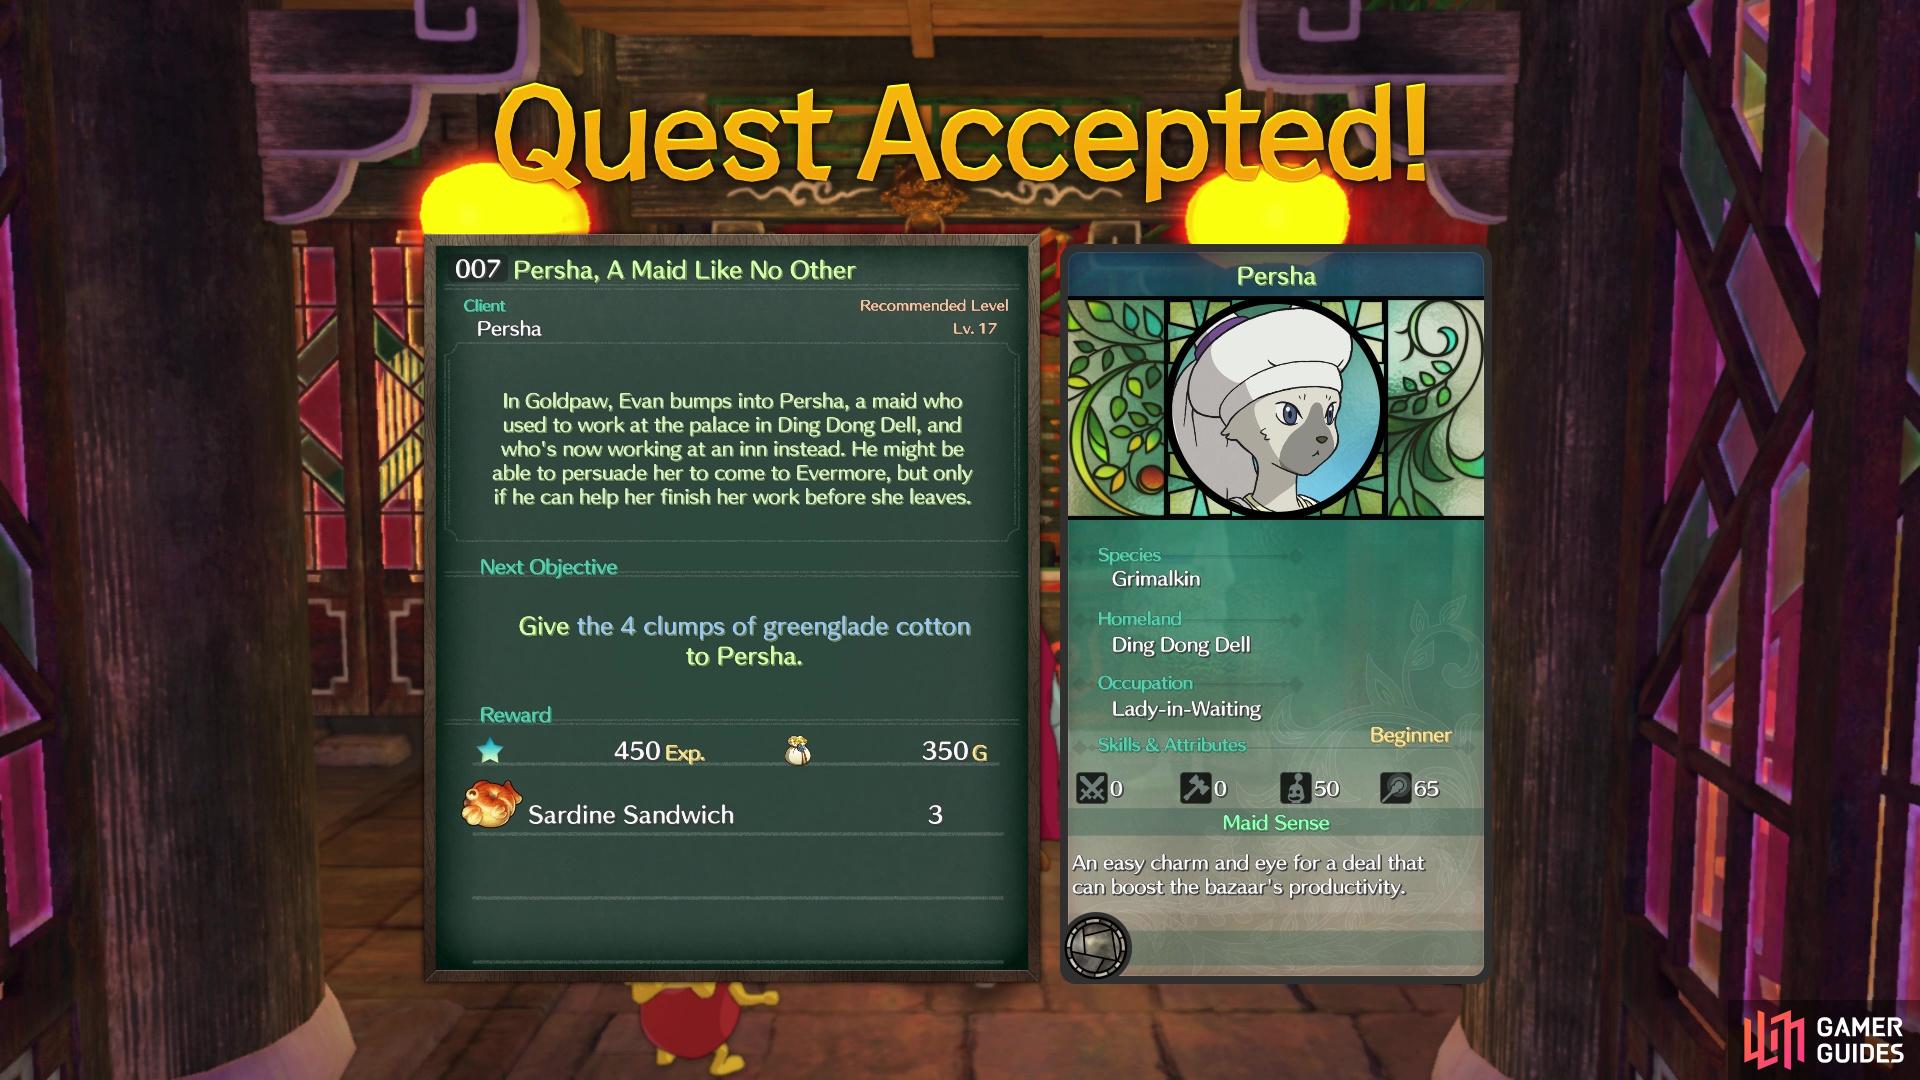 You'll know a sidequest rewards a new citizen by the stats card on the right side